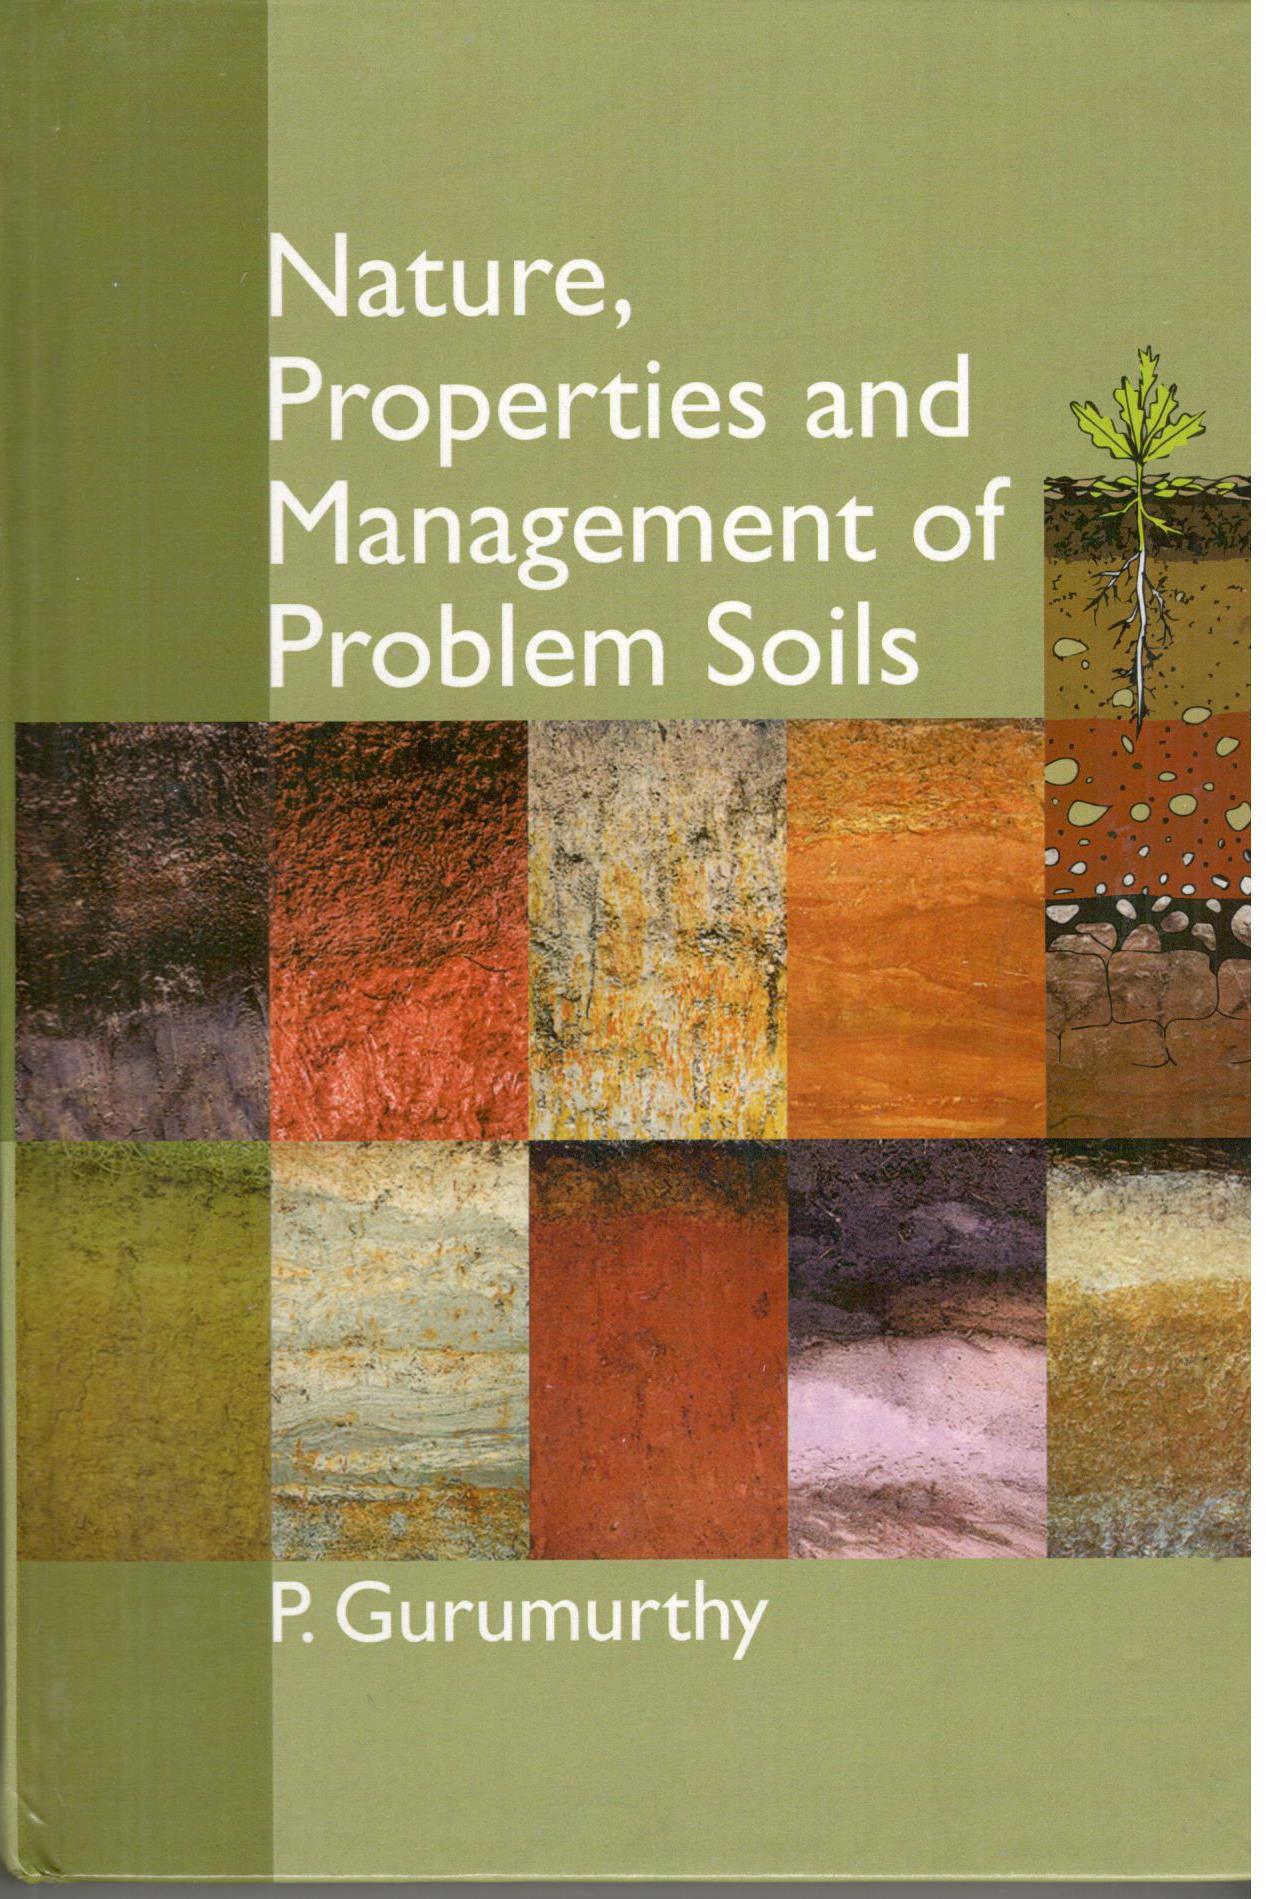 Nature, Properties and Management of Problems Soils